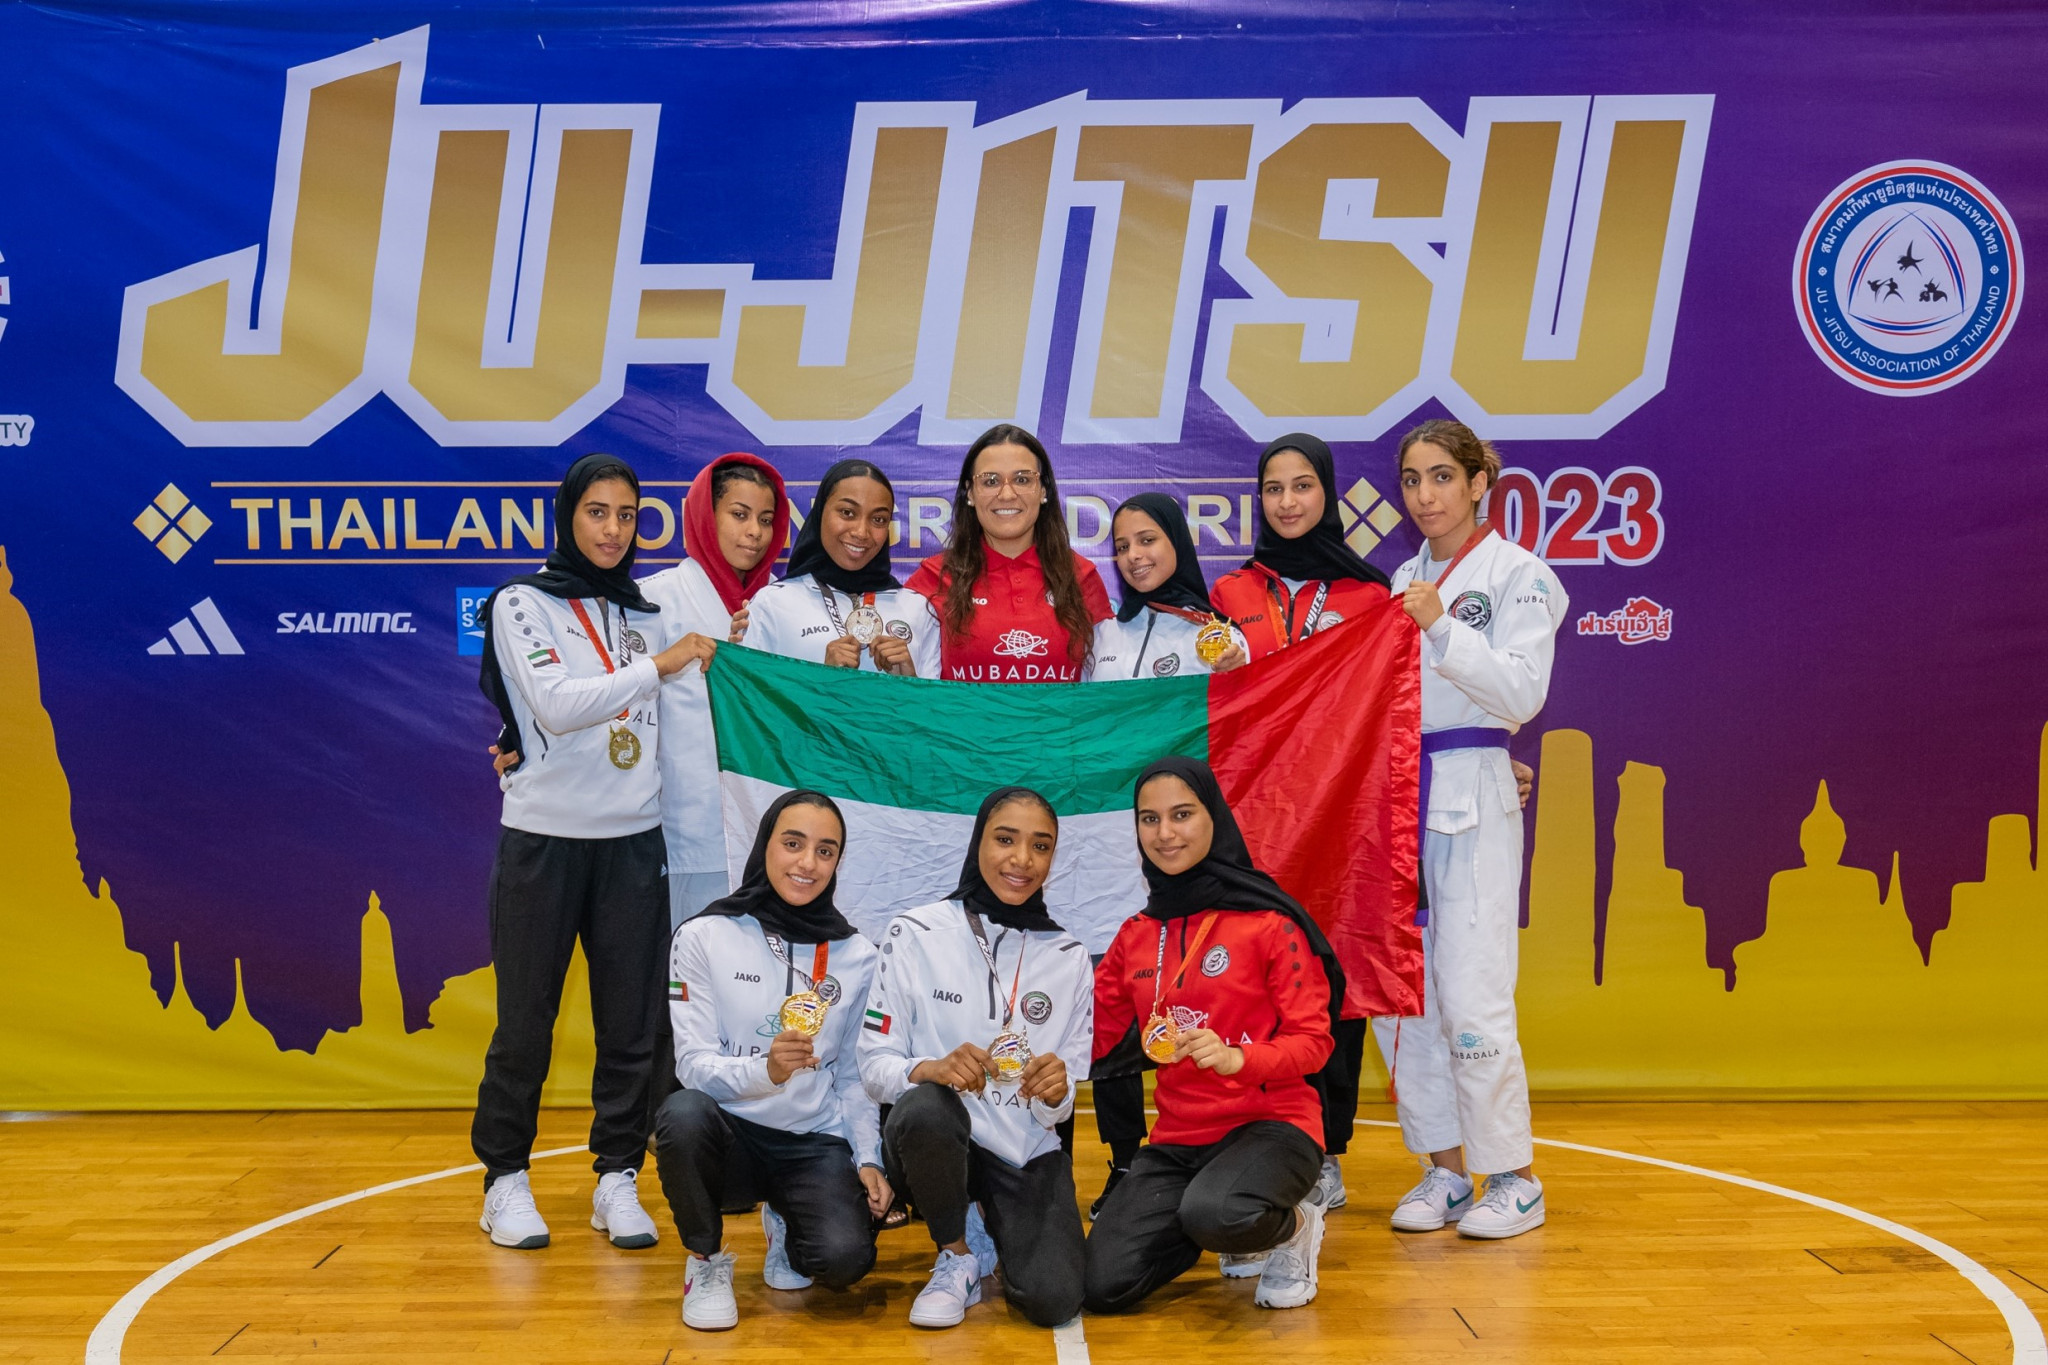 The United Arab Emirates won nine gold medals at the event ©Action UAE